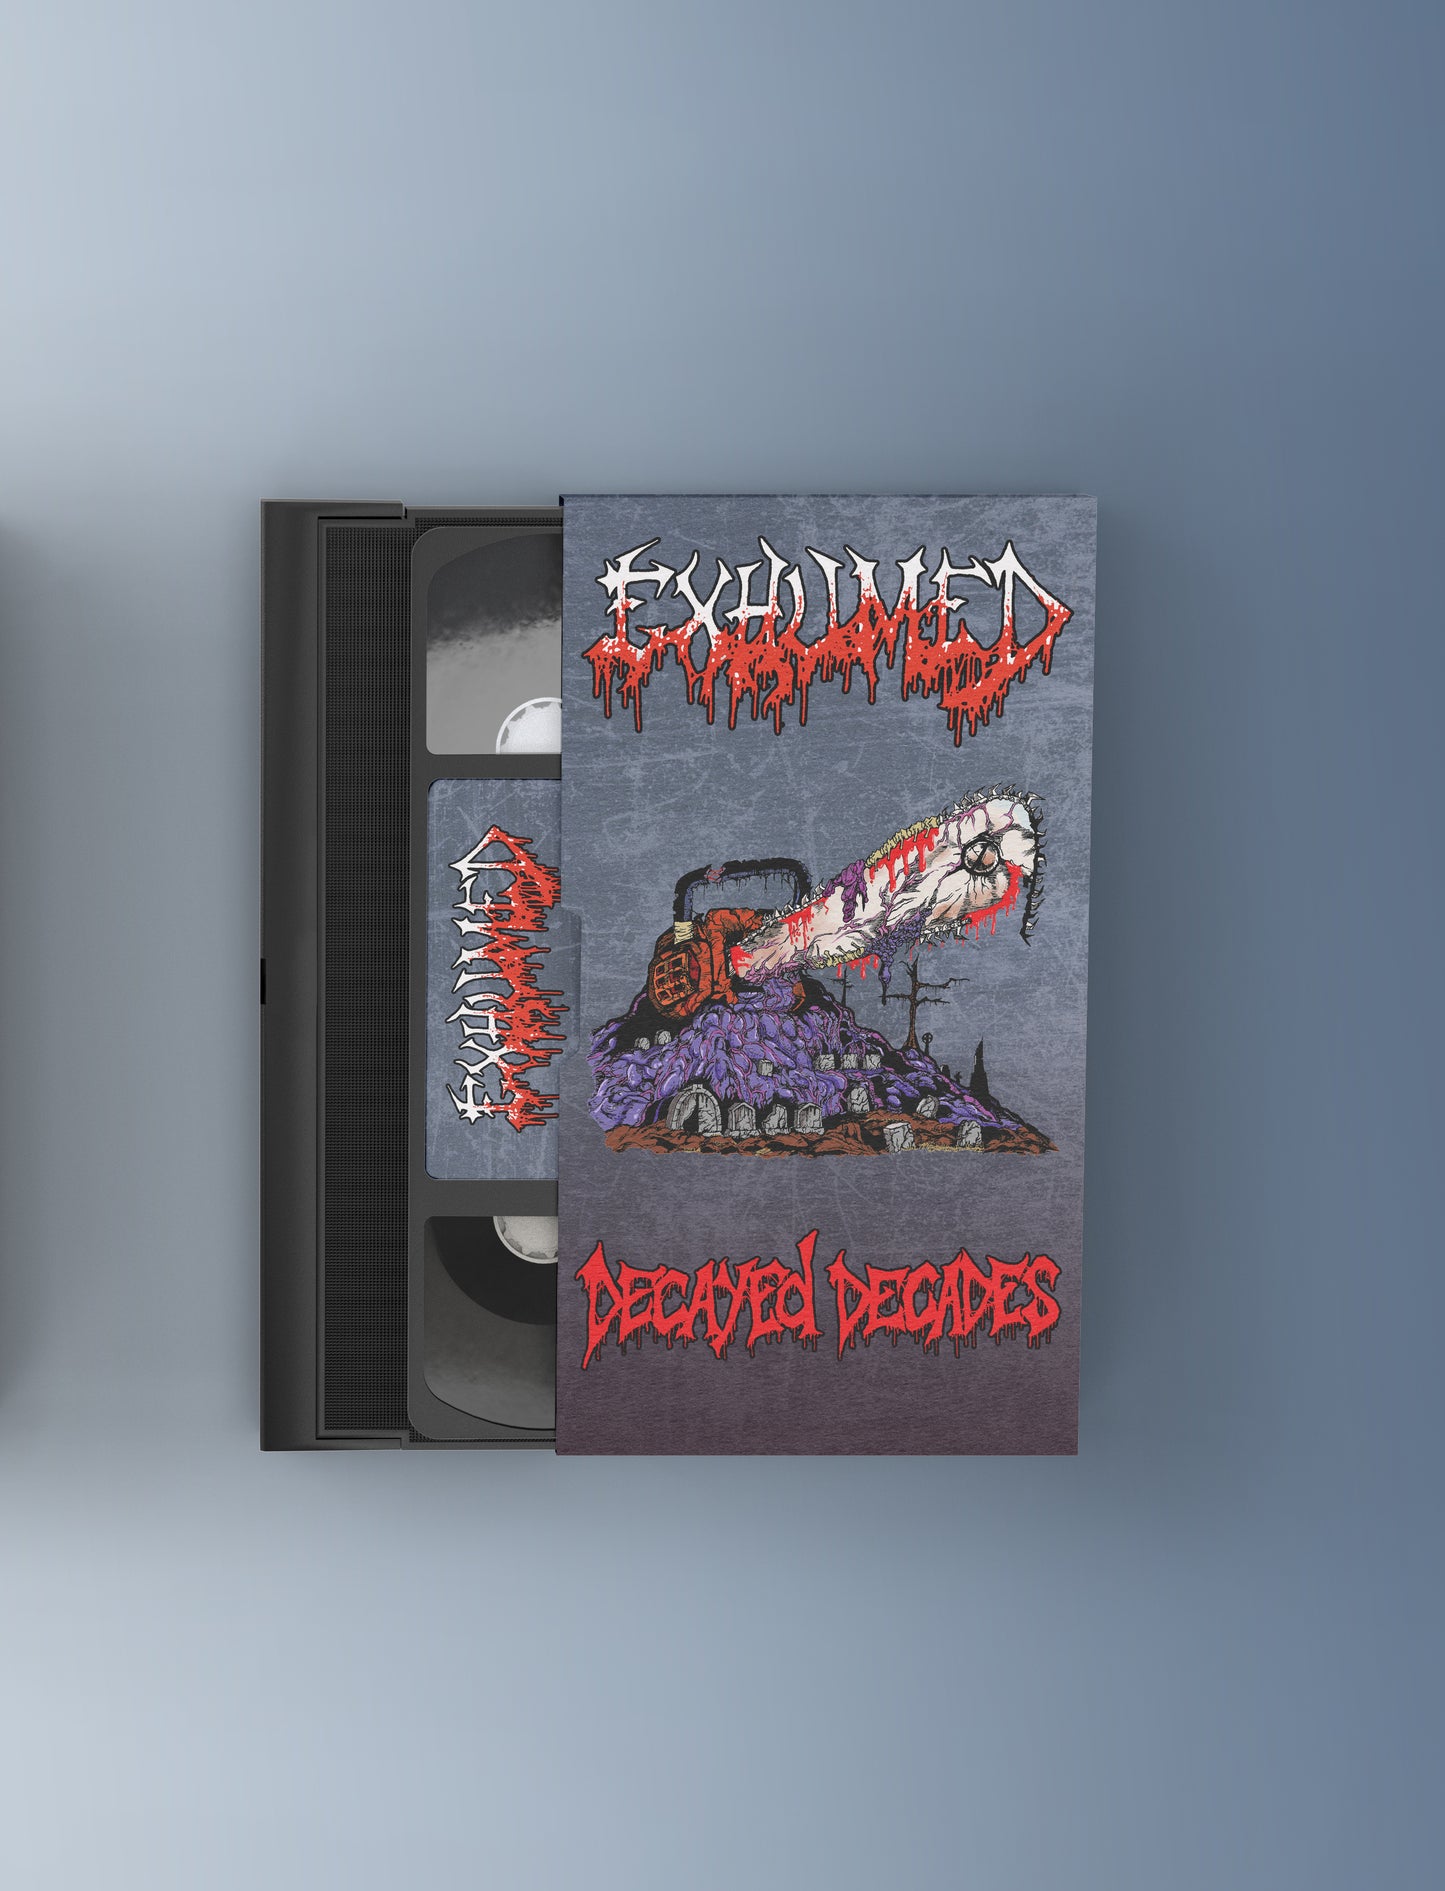 EXHUMED "Decayed Decades" ROTumentary on DVD and VHS Pre-order (ships June 20th)